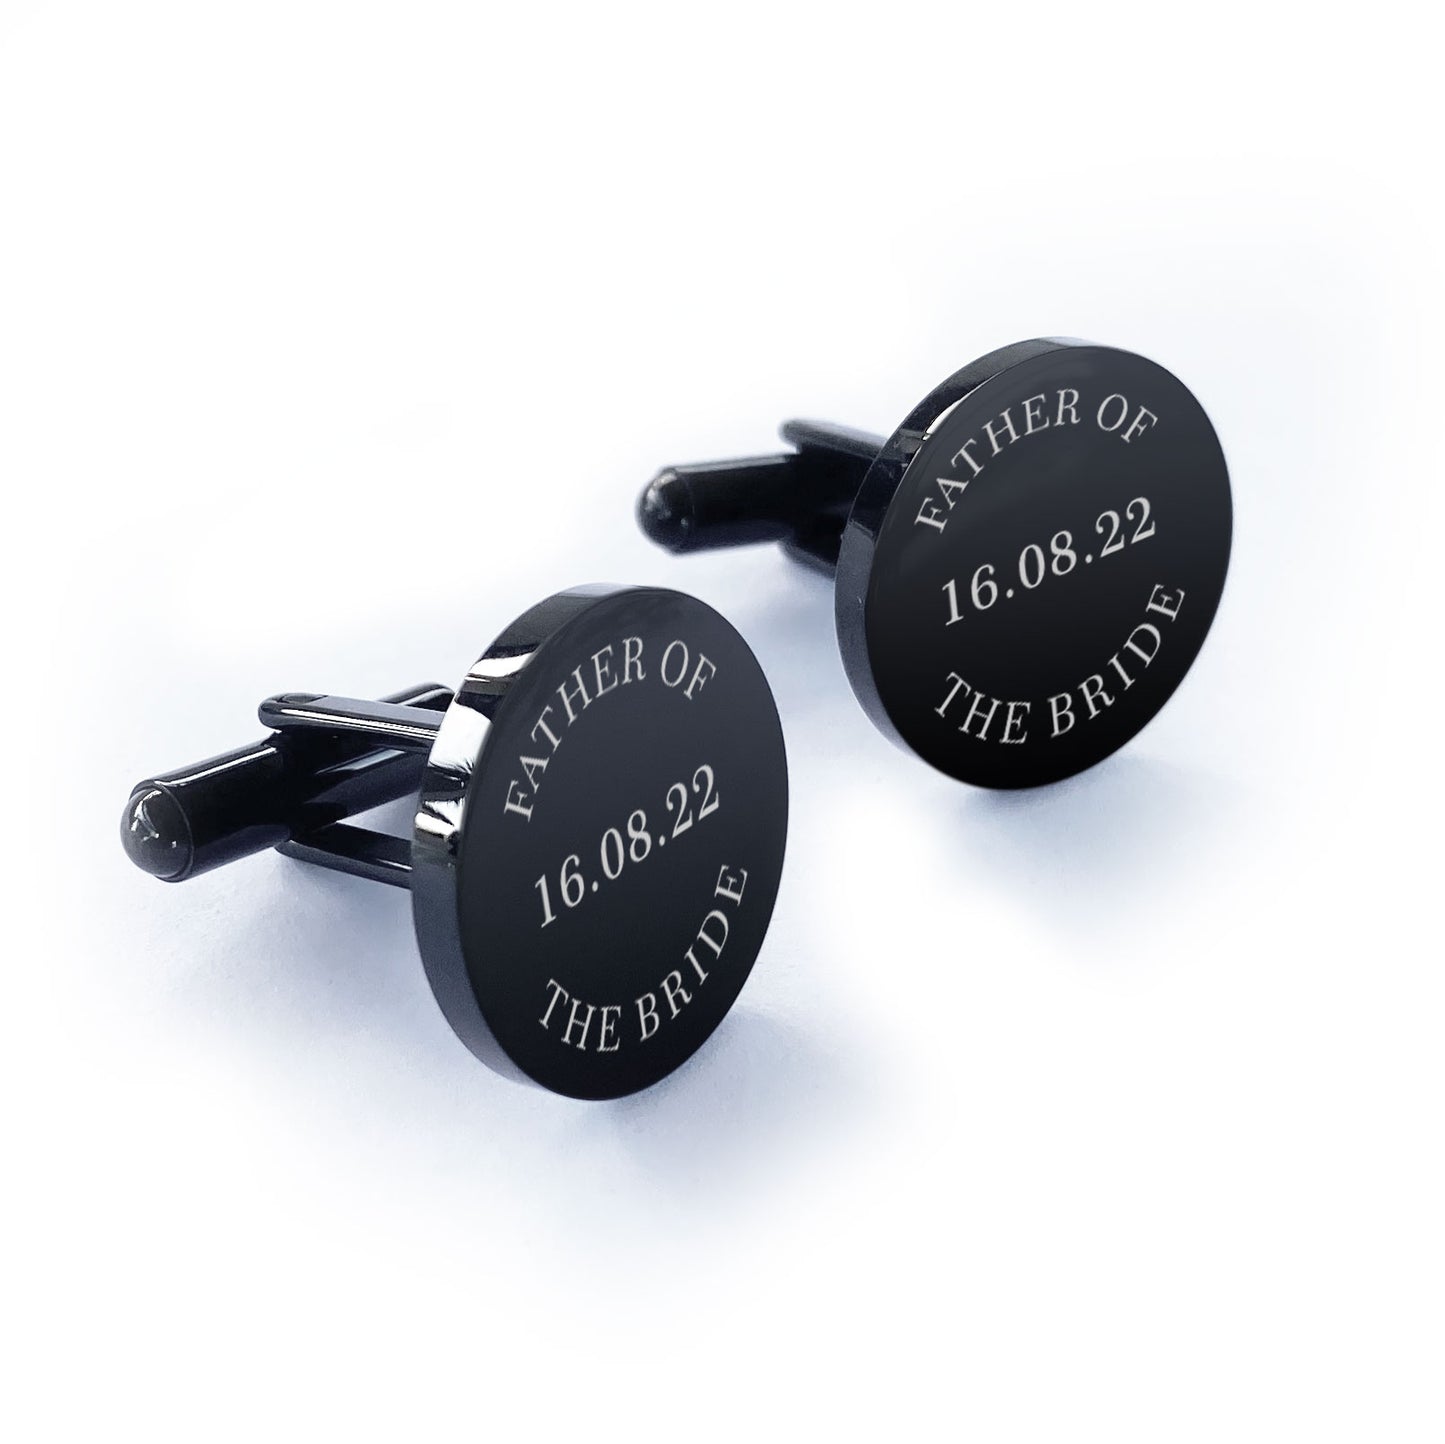 Engraved Round Stainless Steel Father of the Bride Mens Wedding Cufflinks Gift with Custom Date Text